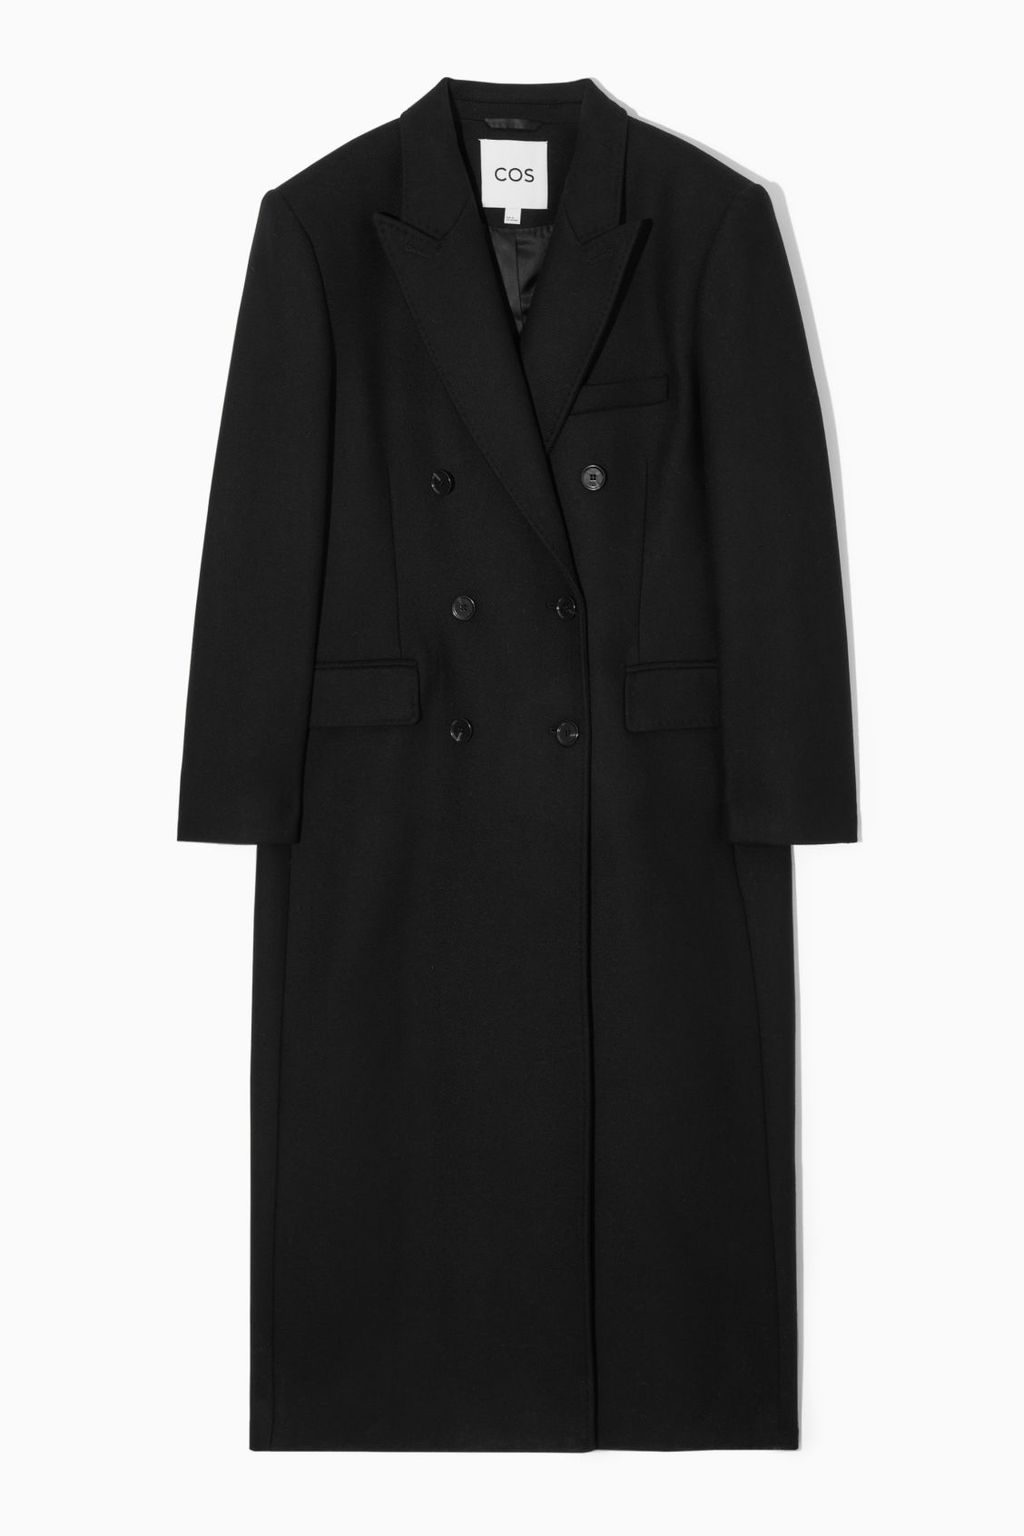 COS's Rounded Wool Coat Is Destined To Sell Out | Who What Wear